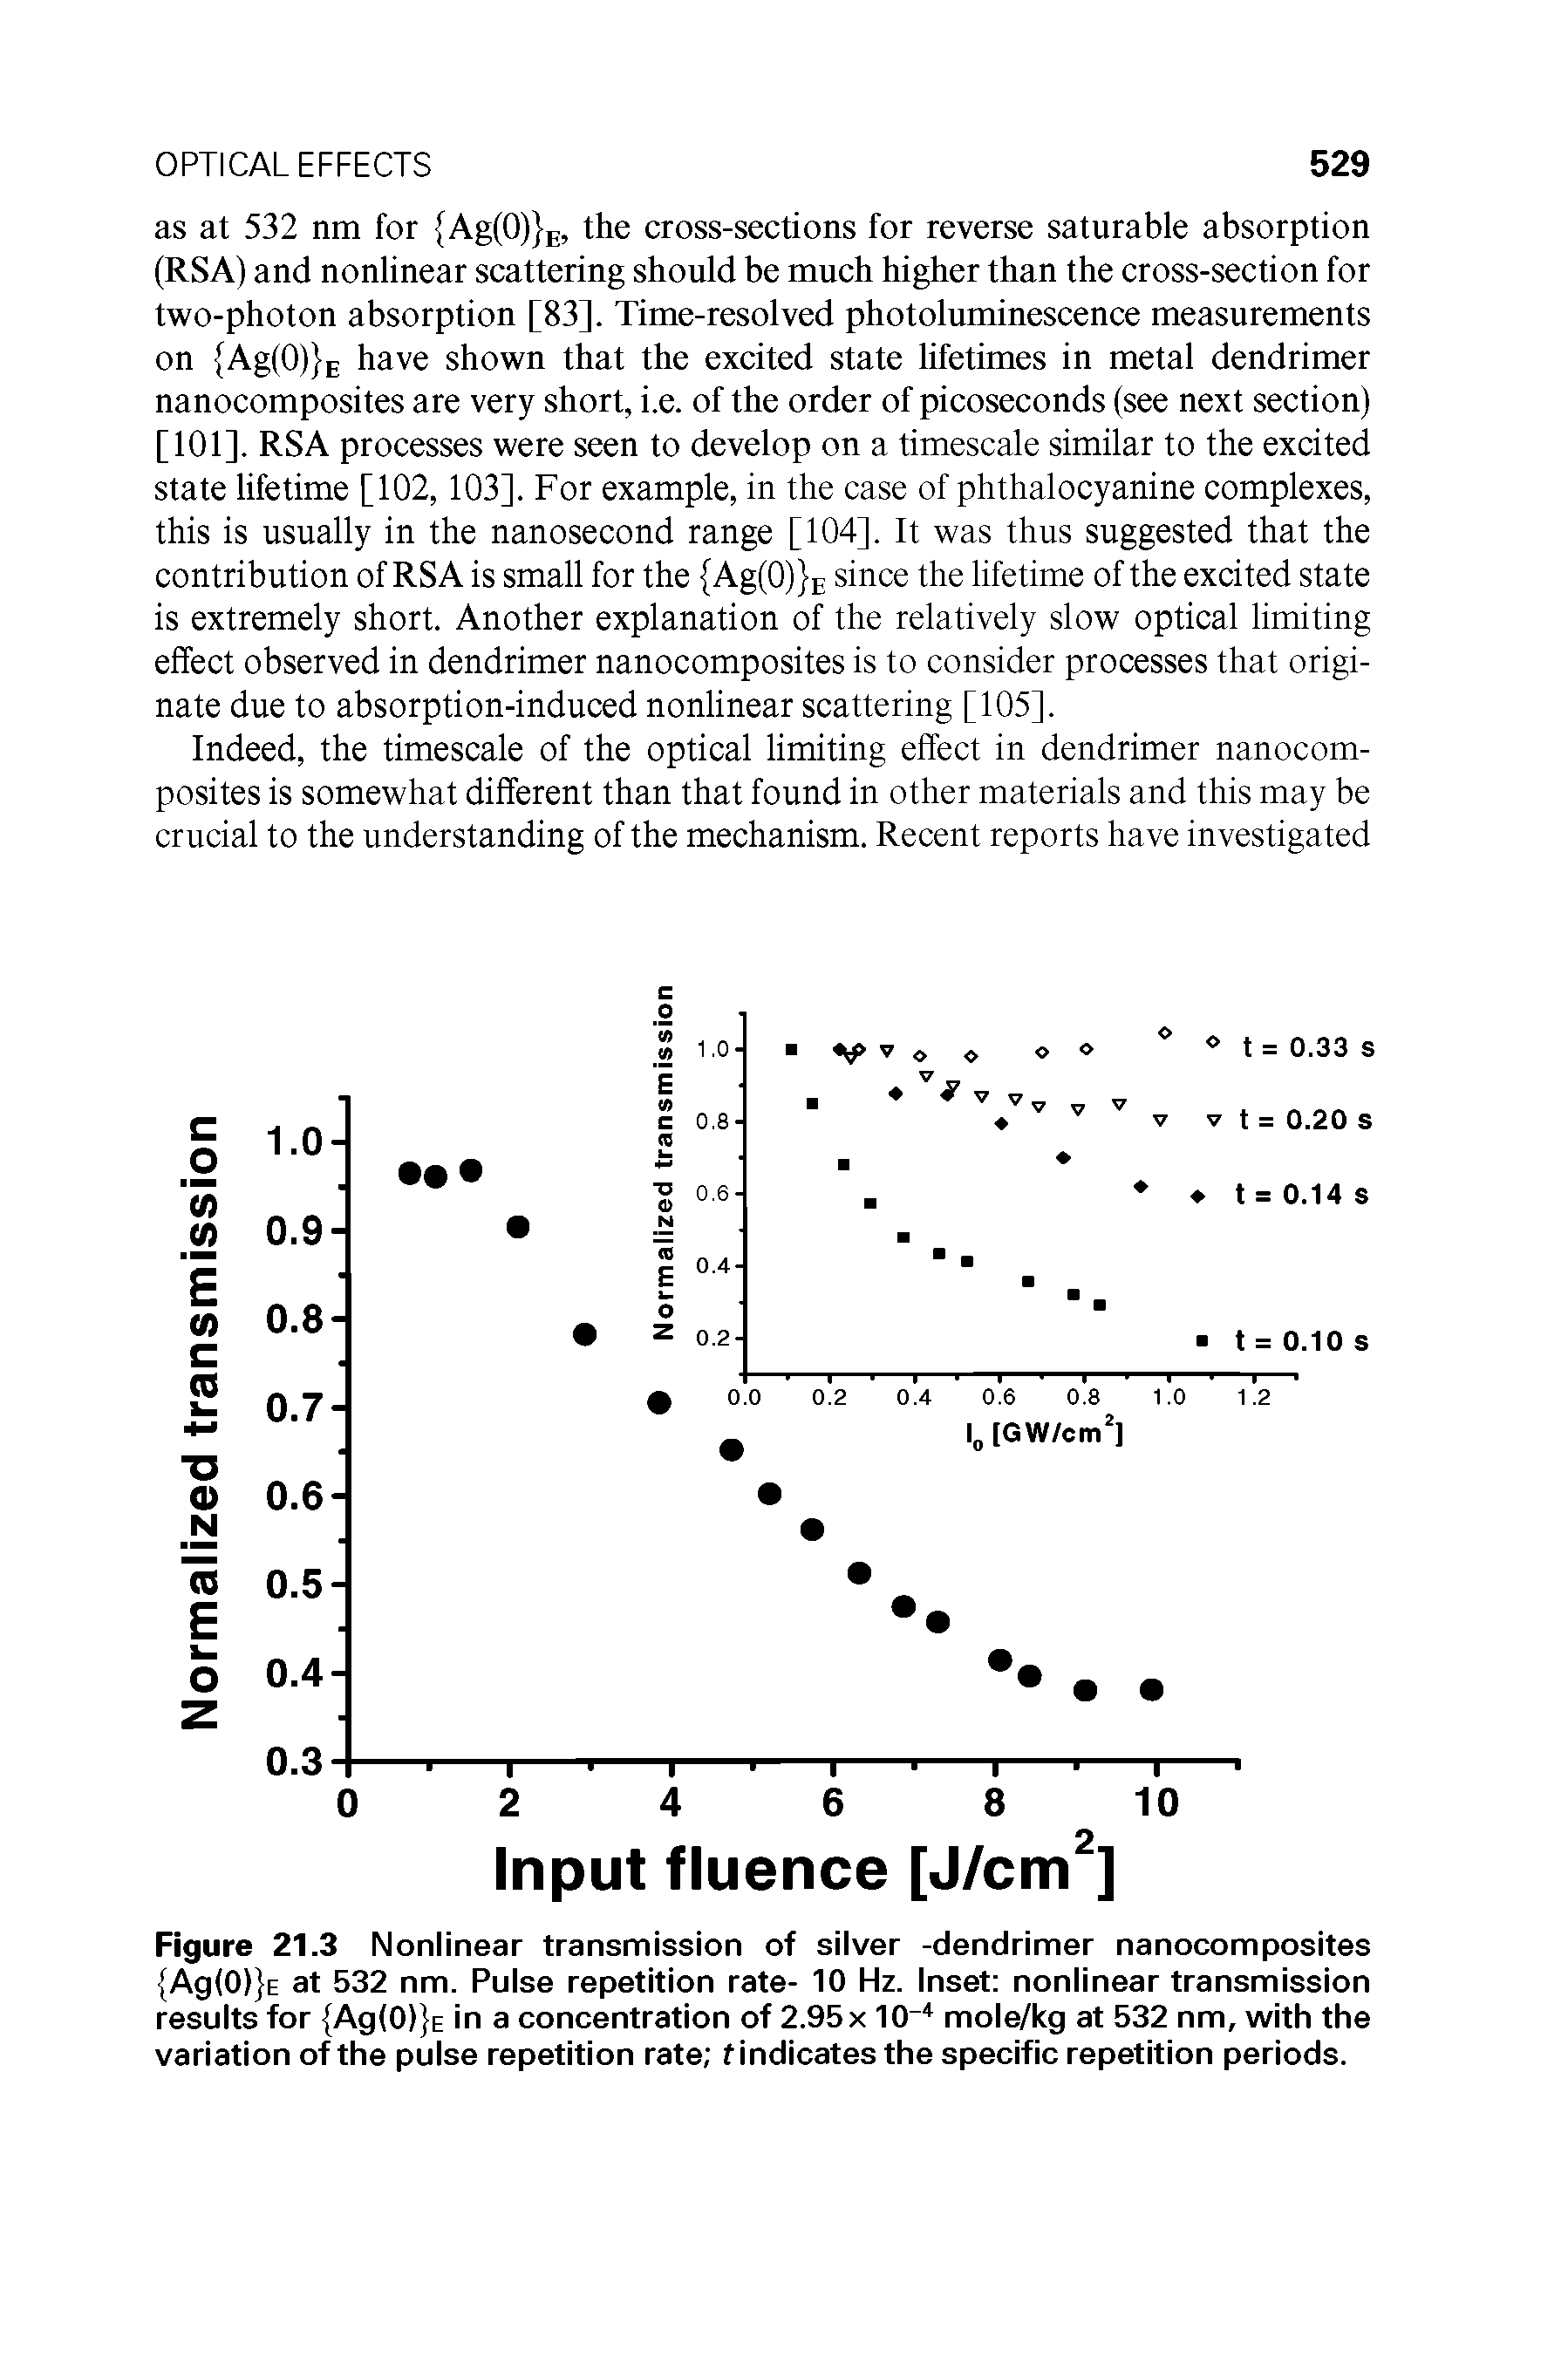 Figure 21.3 Nonlinear transmission of silver -dendrimer nanocomposites Ag(0) E at 532 nm. Pulse repetition rate- 10 Hz. Inset nonlinear transmission results for Ag(0) E in a concentration of 2.95x 10 4 mole/kg at 532 nm, with the variation of the pulse repetition rate t indicates the specific repetition periods.